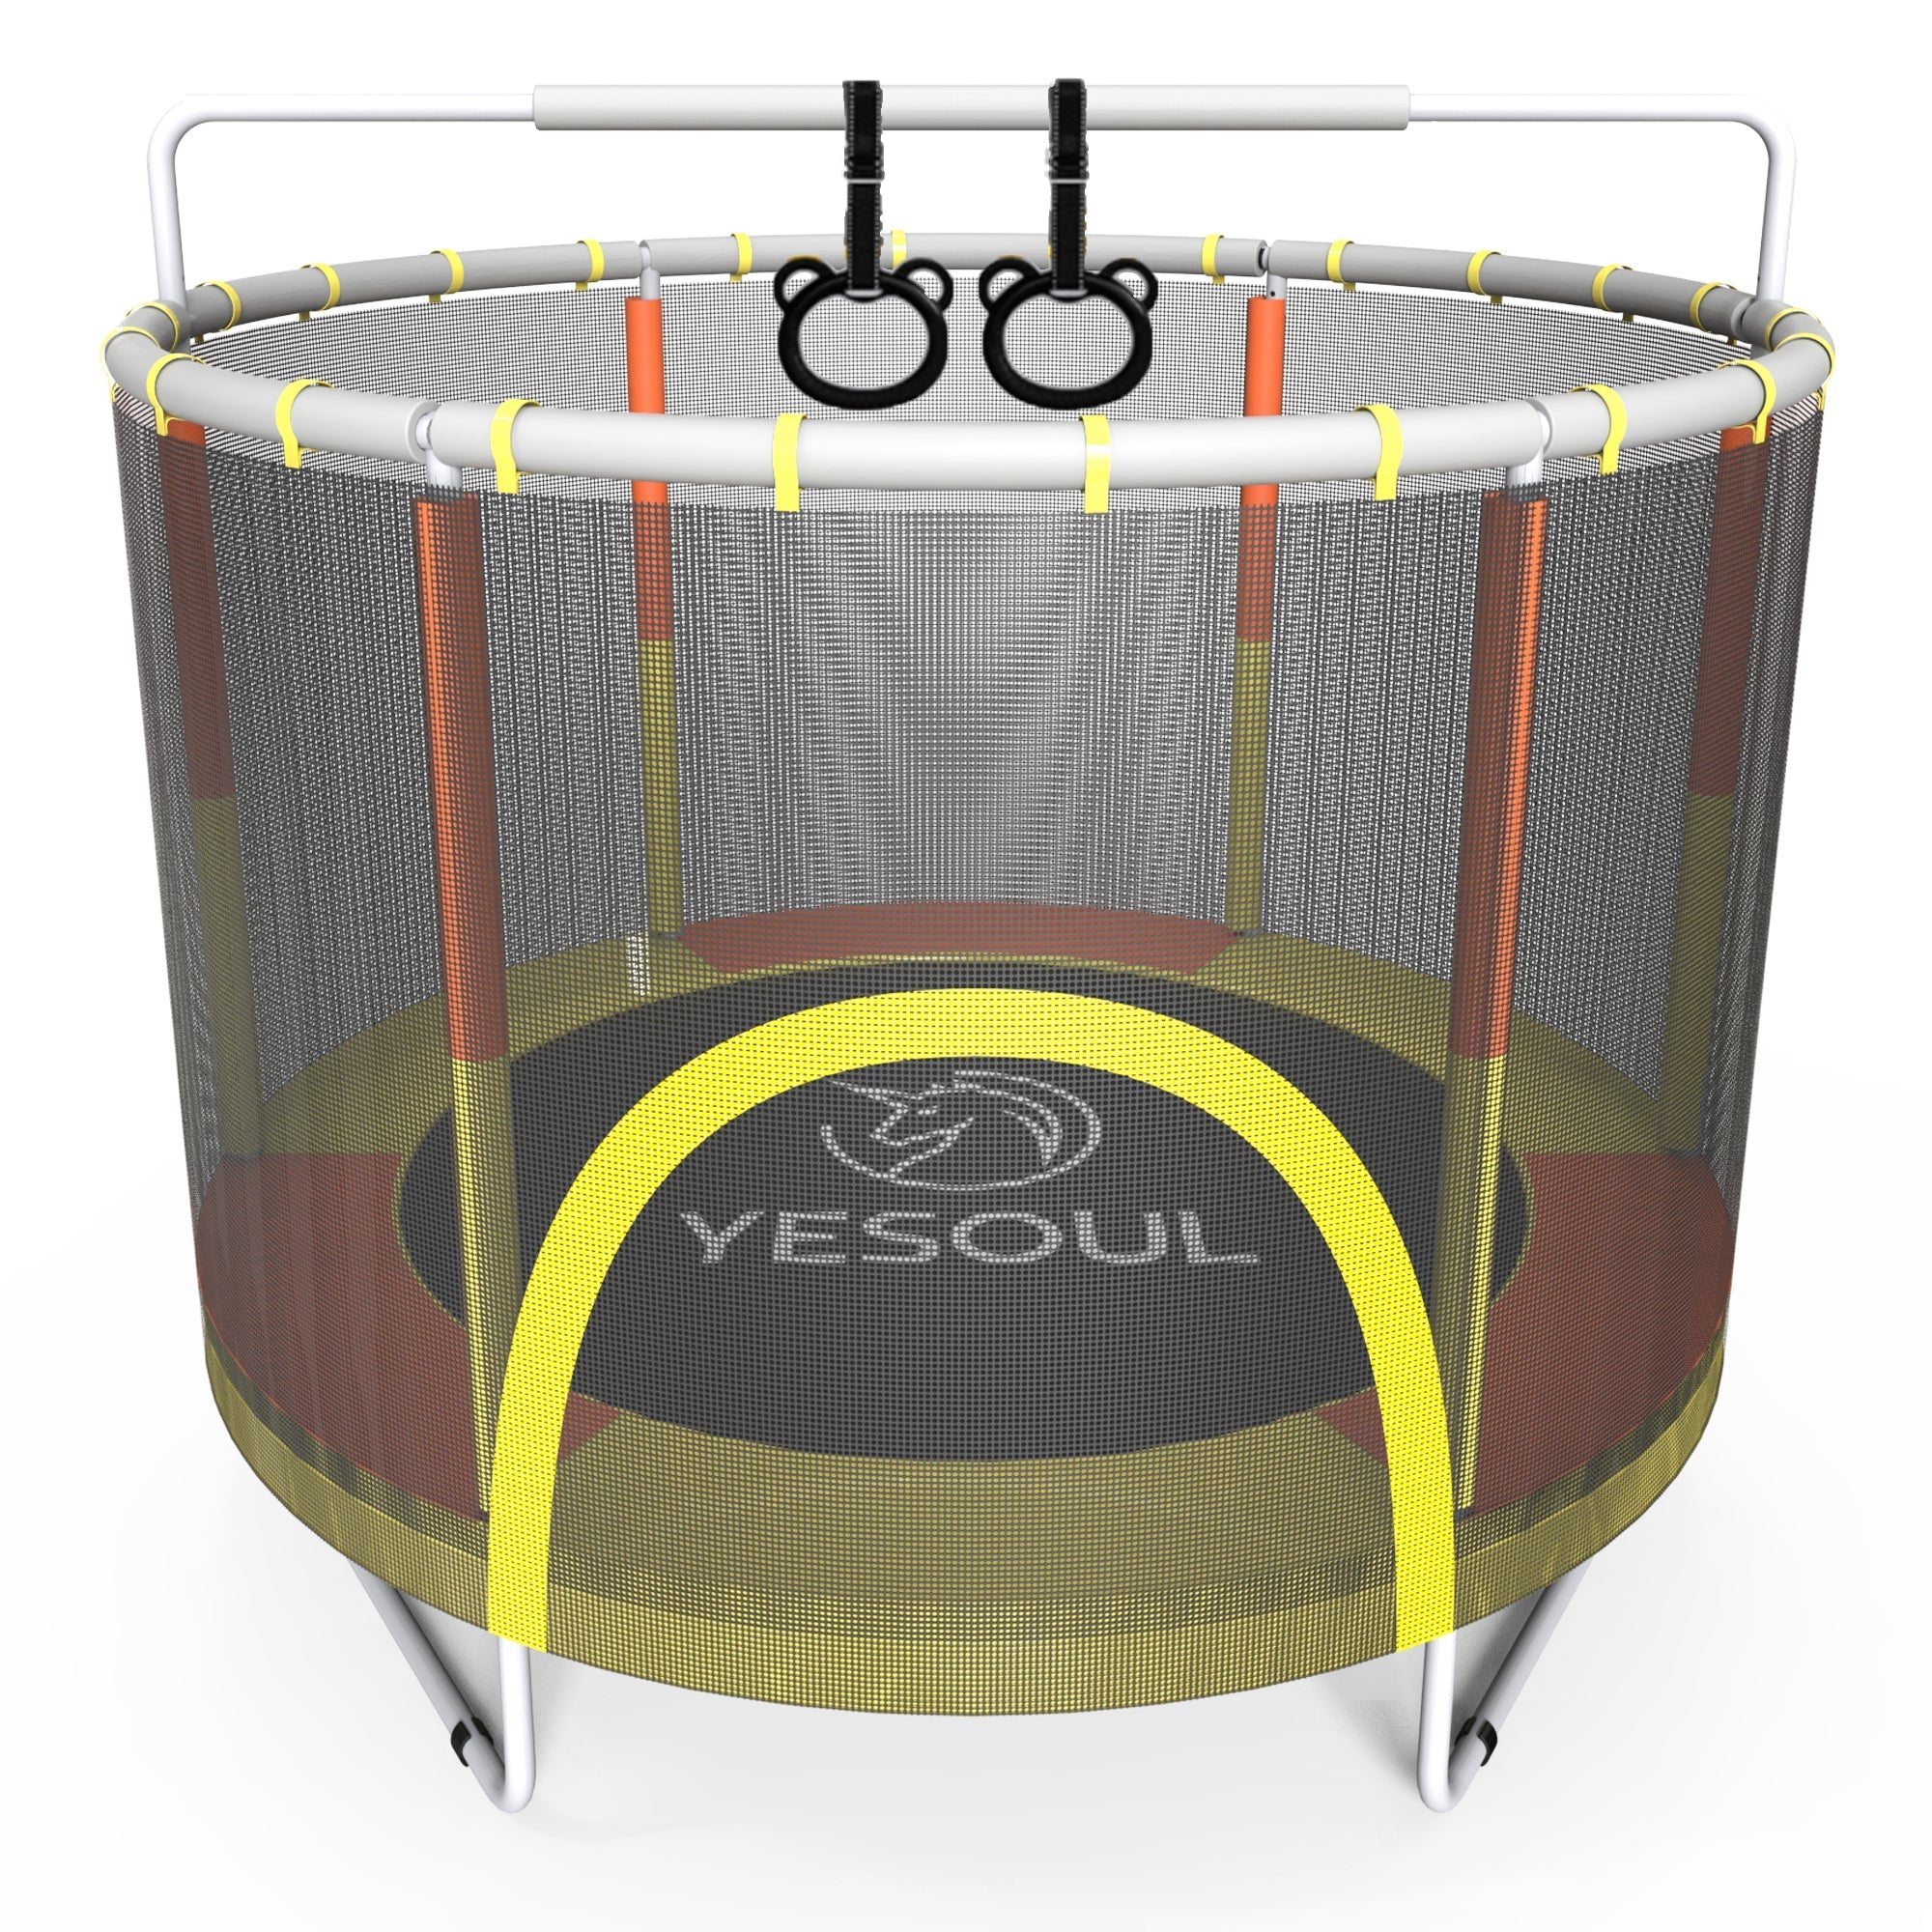 After Sale Yesoul Trampoline for Kids(not for customer)